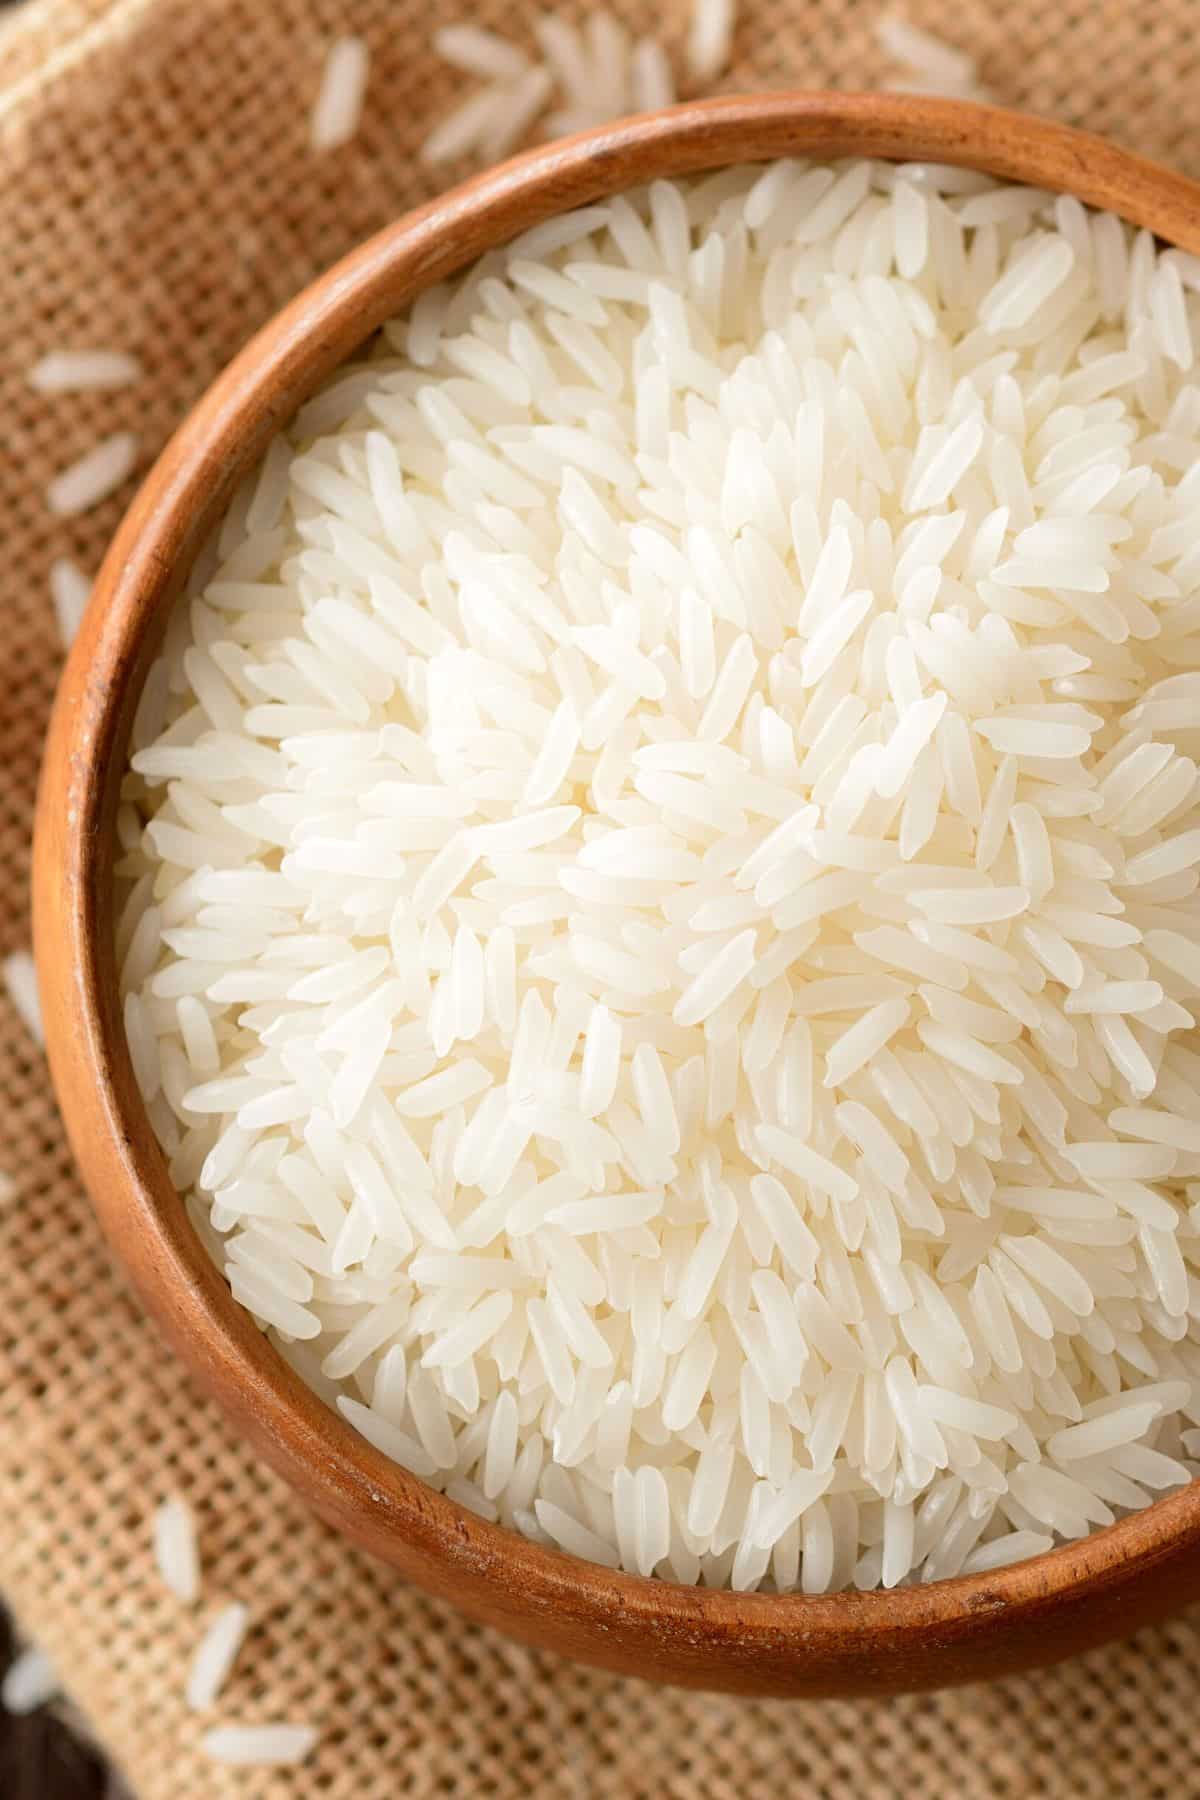 A bowl of uncooked white rice.